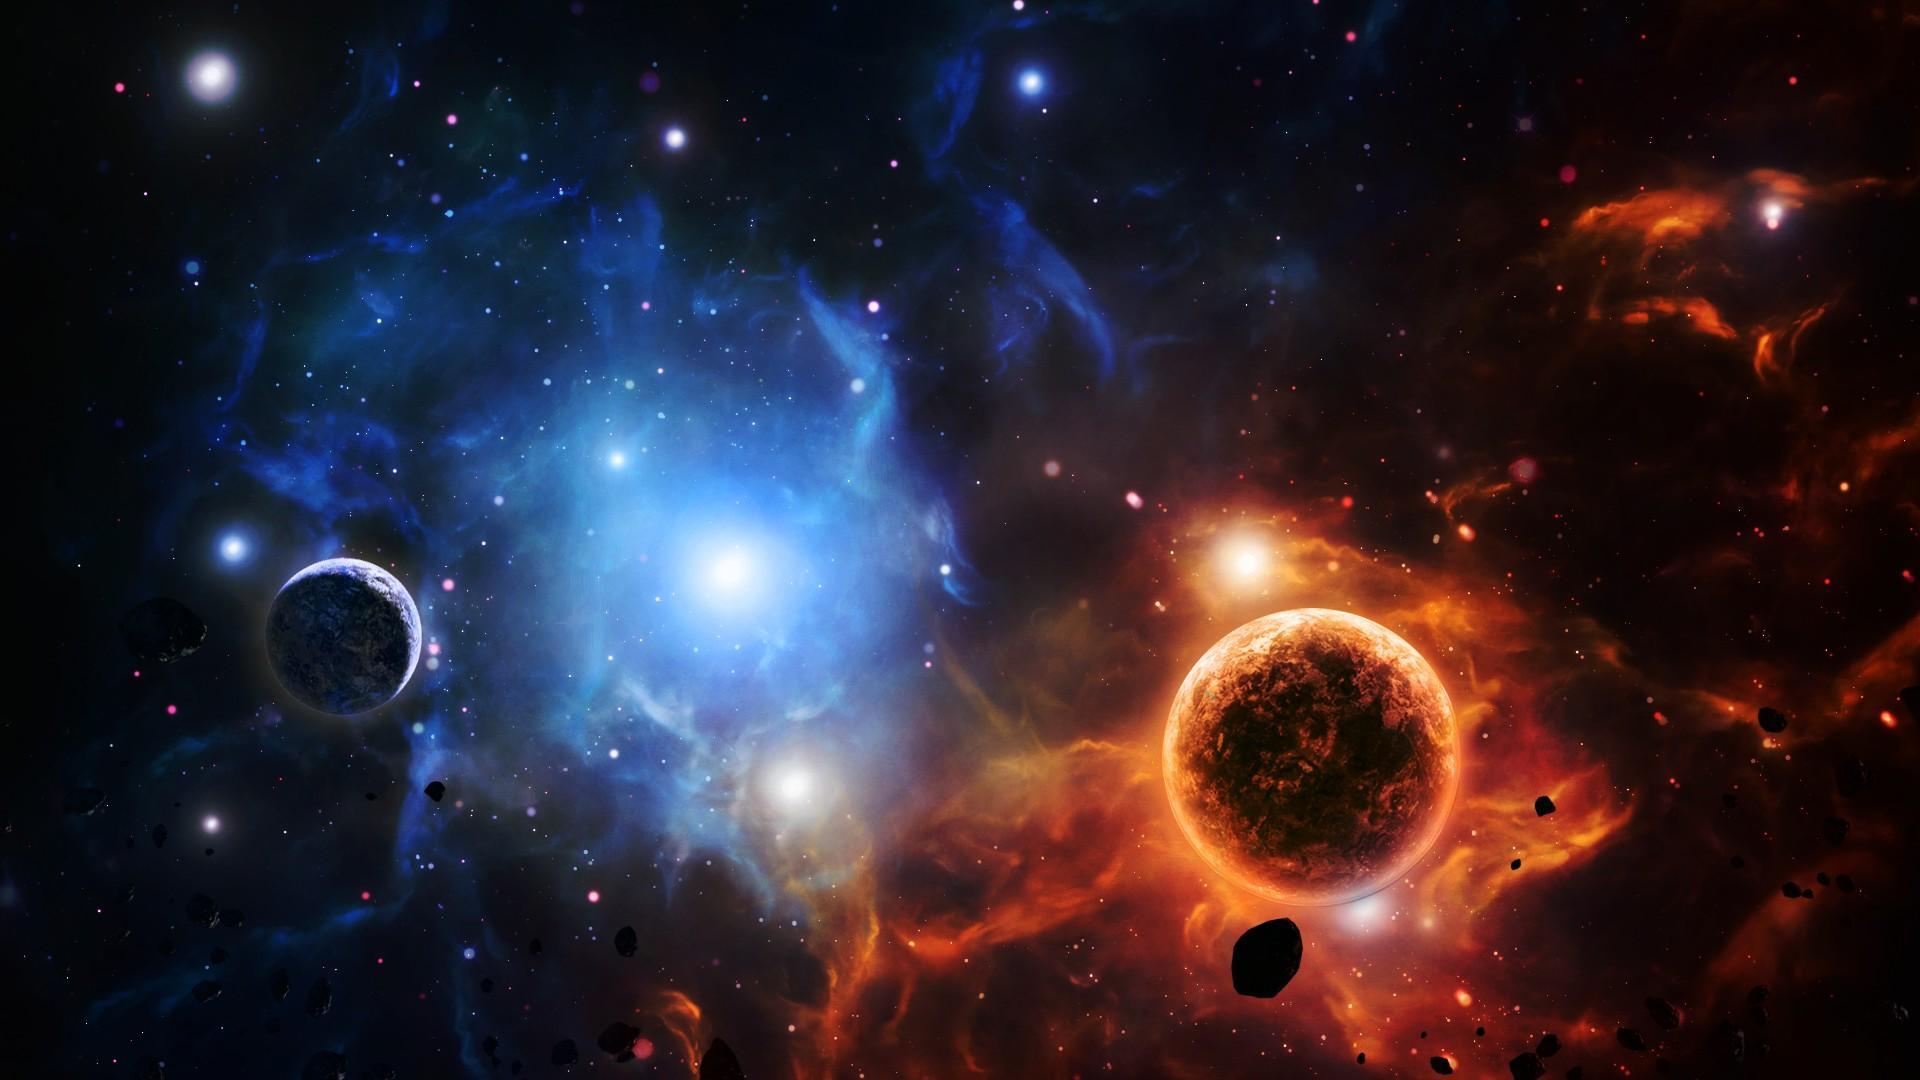 Artwork asteroids nebulae outer space planets wallpapers